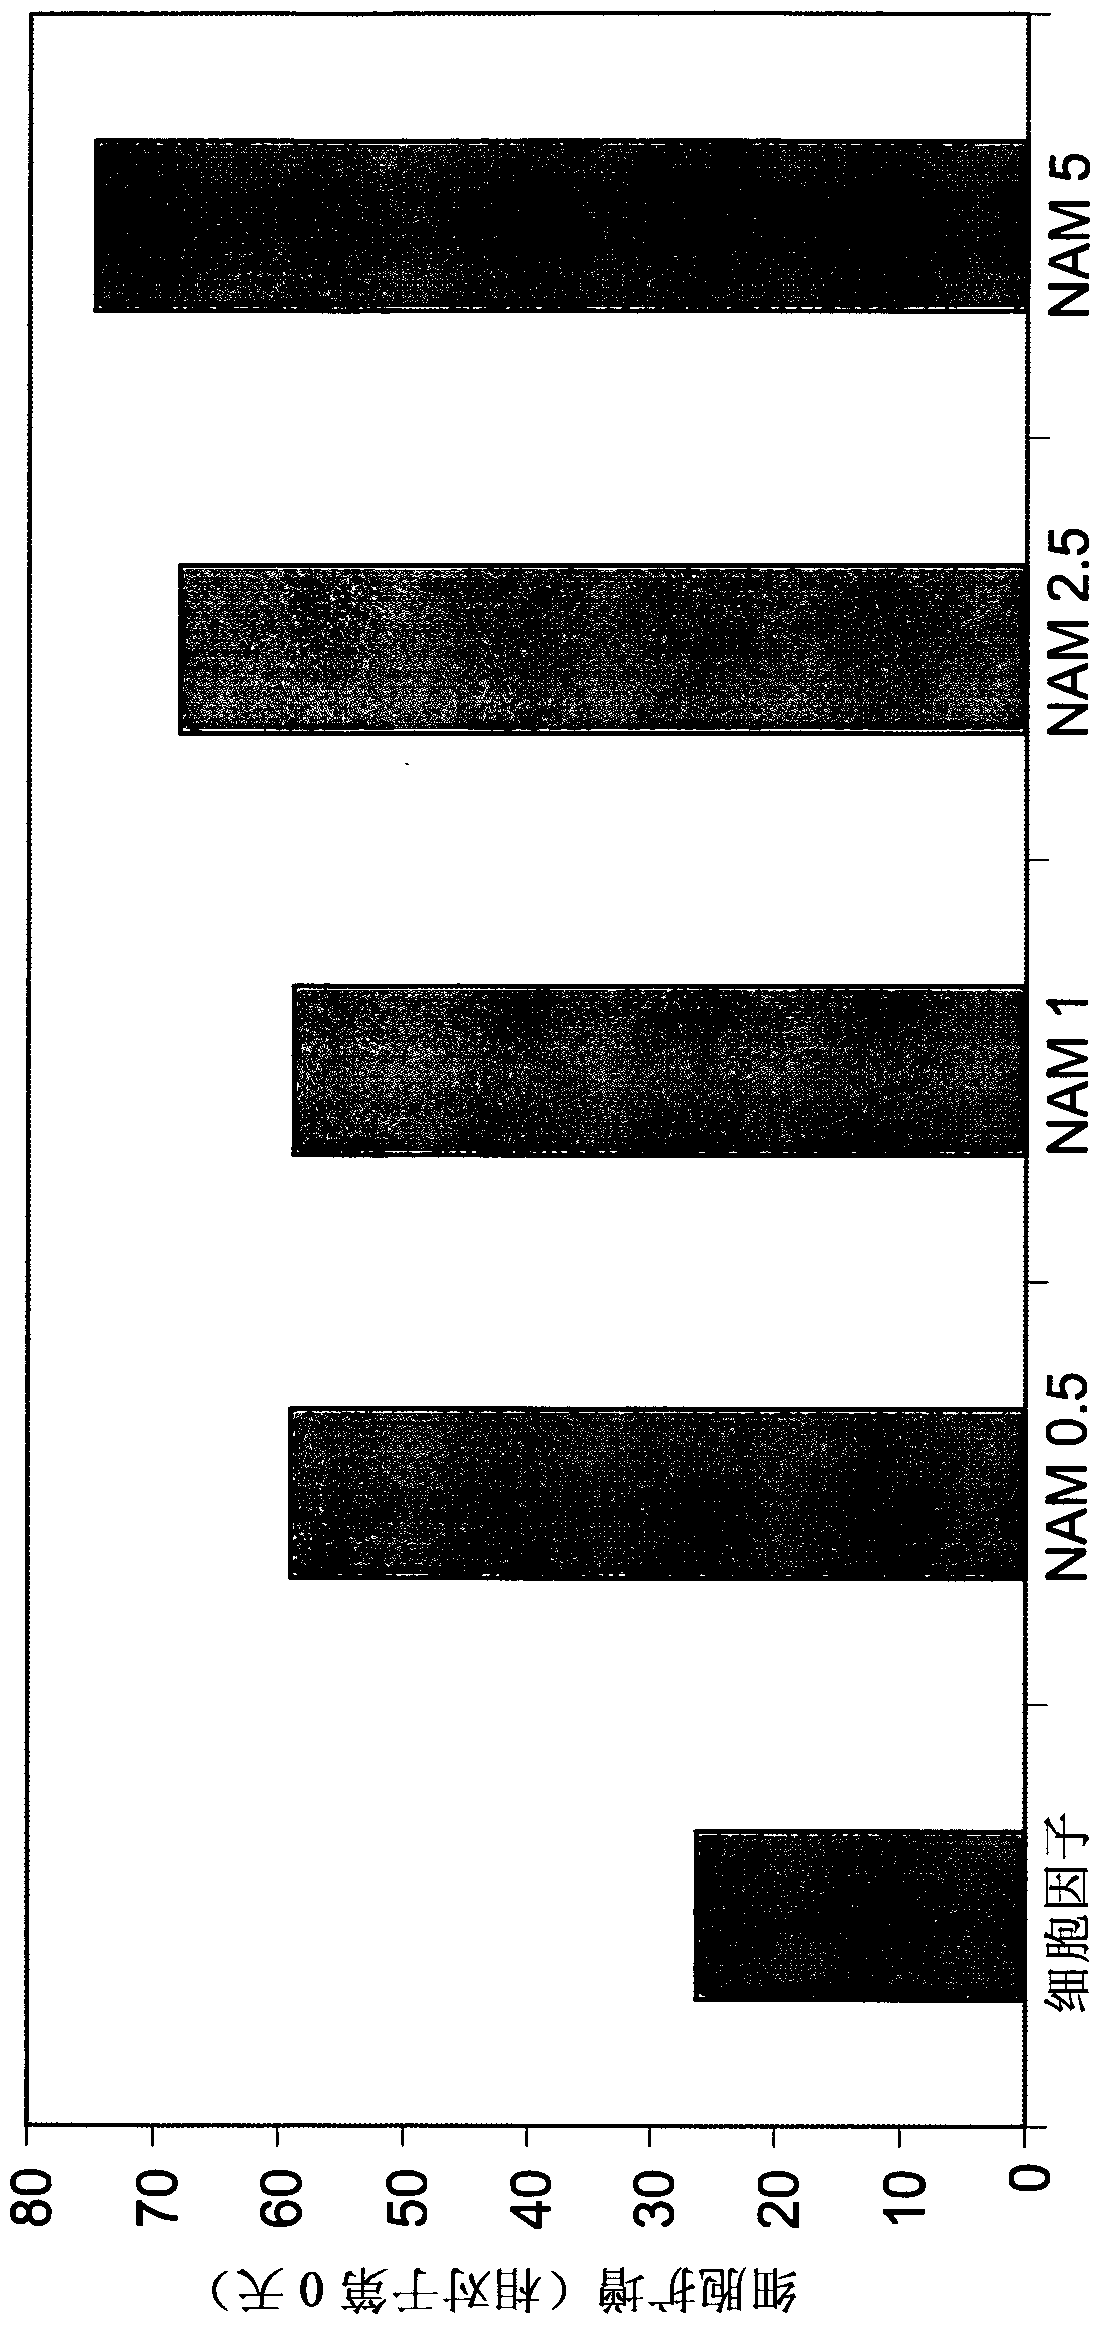 Methods for enhancing natural killer cell proliferation and activity